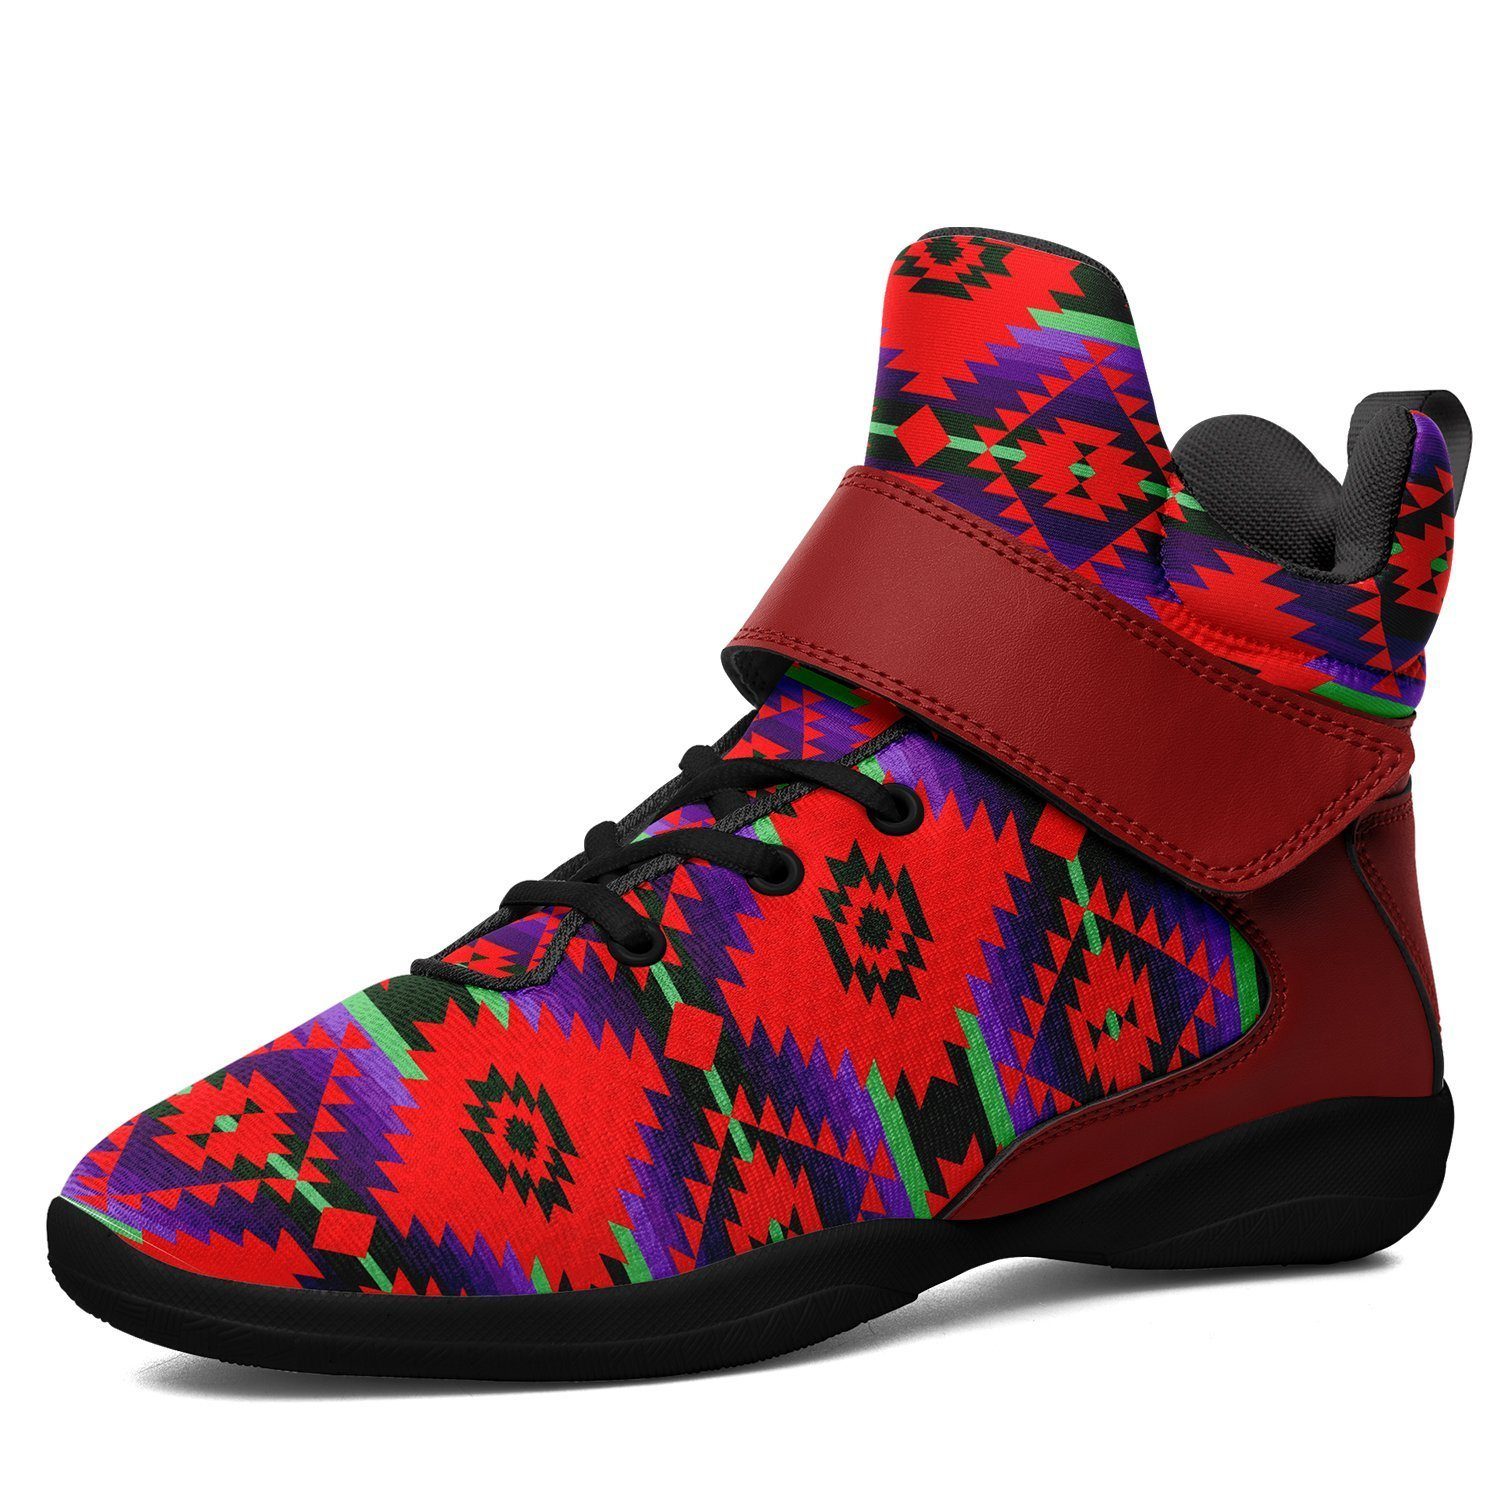 Cree Confederacy Chicken Dance Ipottaa Basketball / Sport High Top Shoes - Black Sole 49 Dzine US Men 7 / EUR 40 Black Sole with Red Strap 